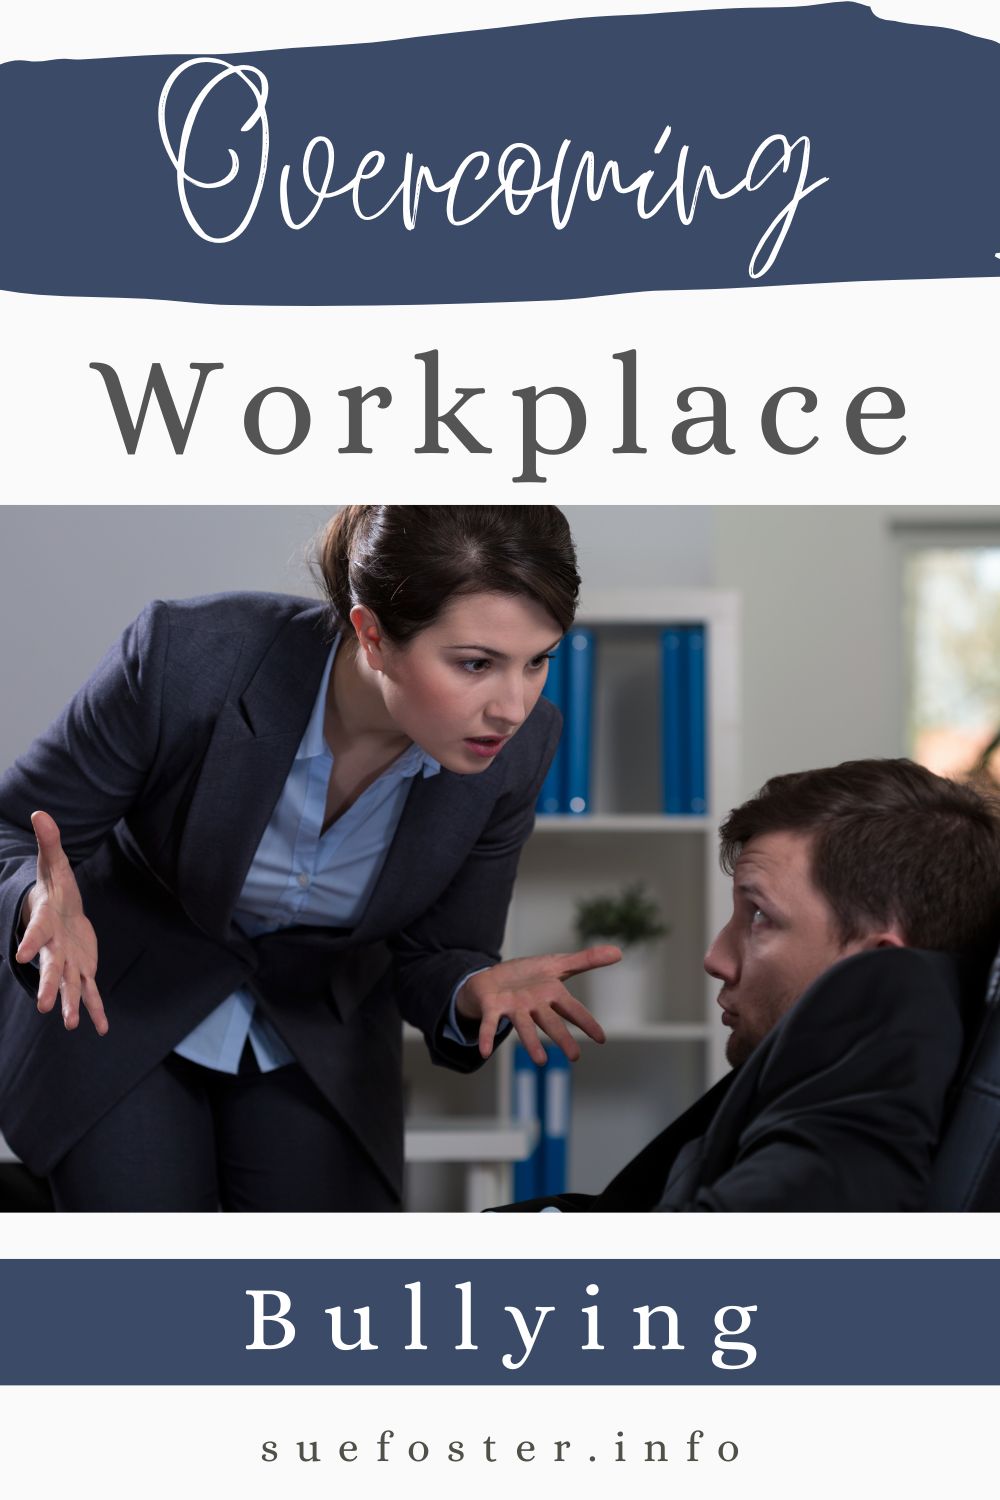 Stop workplace bullying with this insightful blog post that shares a personal encounter and offers actionable strategies.